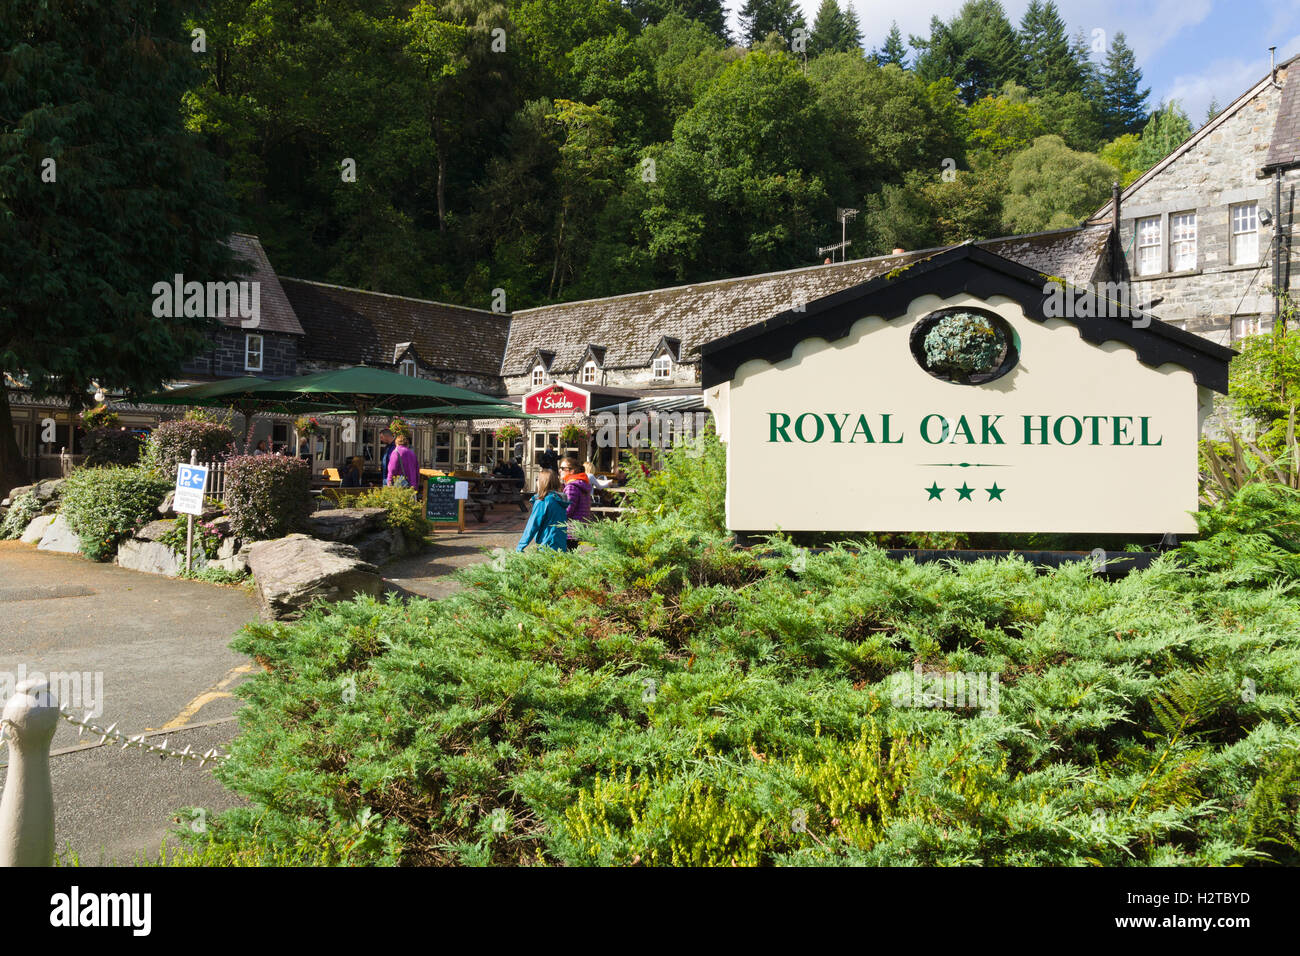 The Stables or Y Stablau beer garden and dining area at The Royal Oak Hotel in Betws y Coed Wales Stock Photo